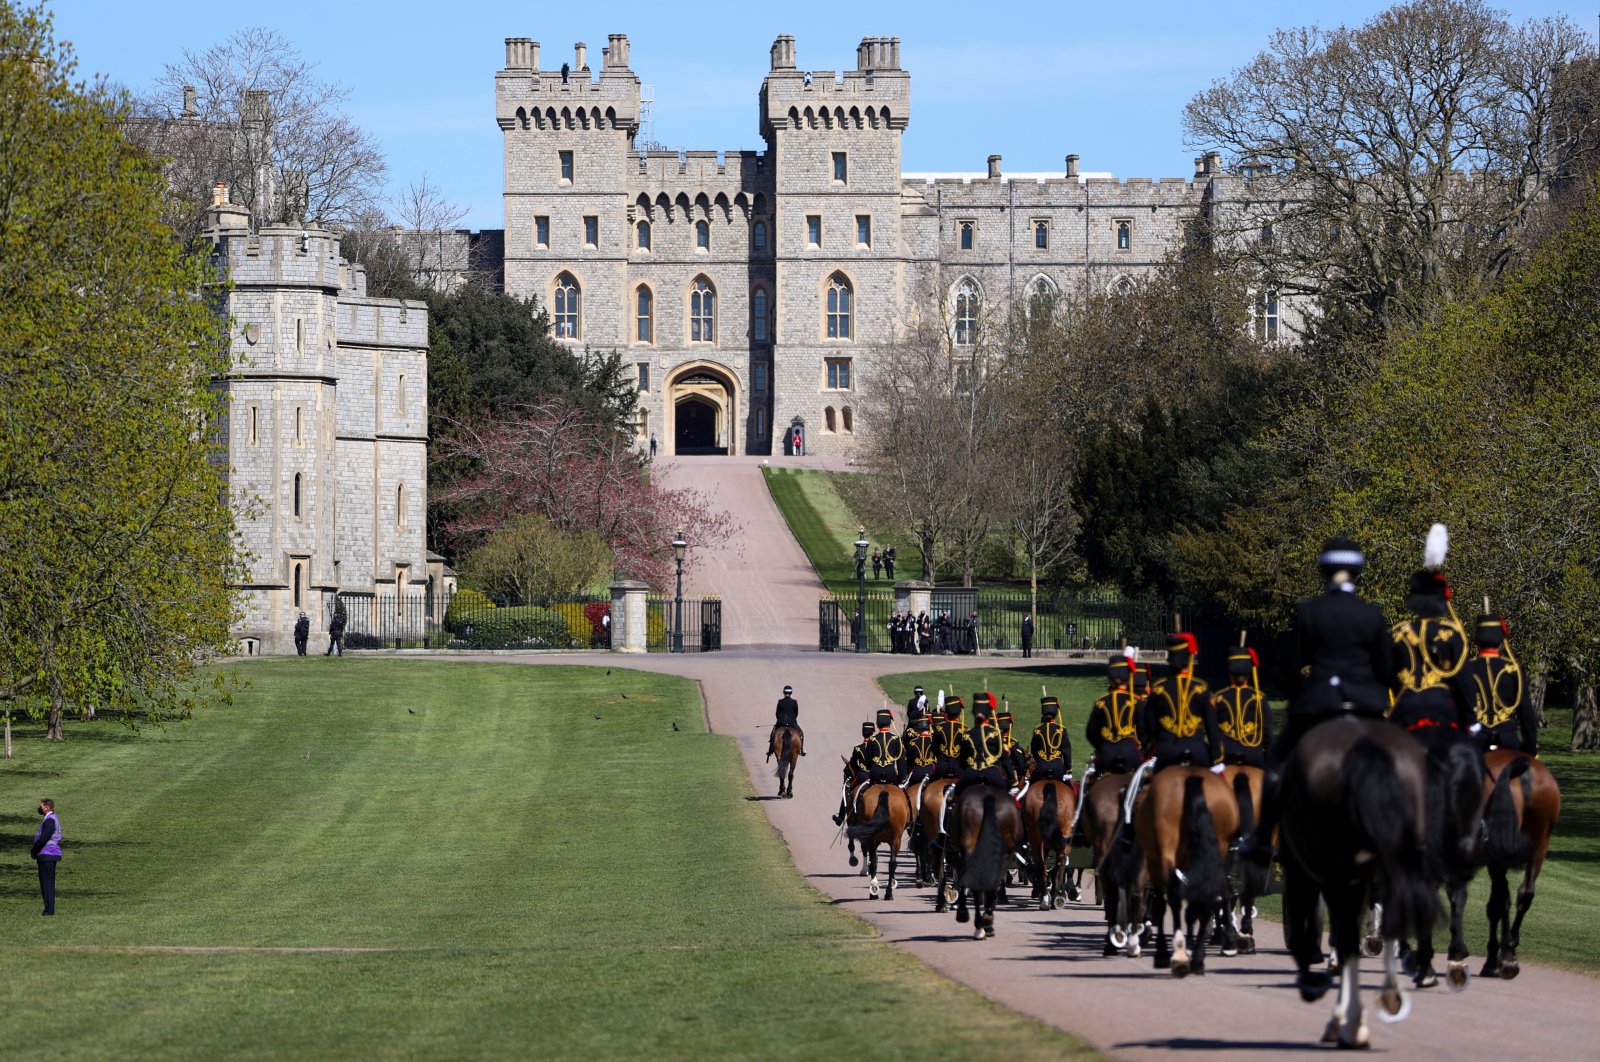 Members of the Kings Troop Royal Horse Artillery arrive at Windsor Castle on the day of the funeral of Britain's Prince Philip, husband of Queen Elizabeth II, who died at the age of 99, in Windsor, Britain, April 17, 2021. (Reuters Photo)